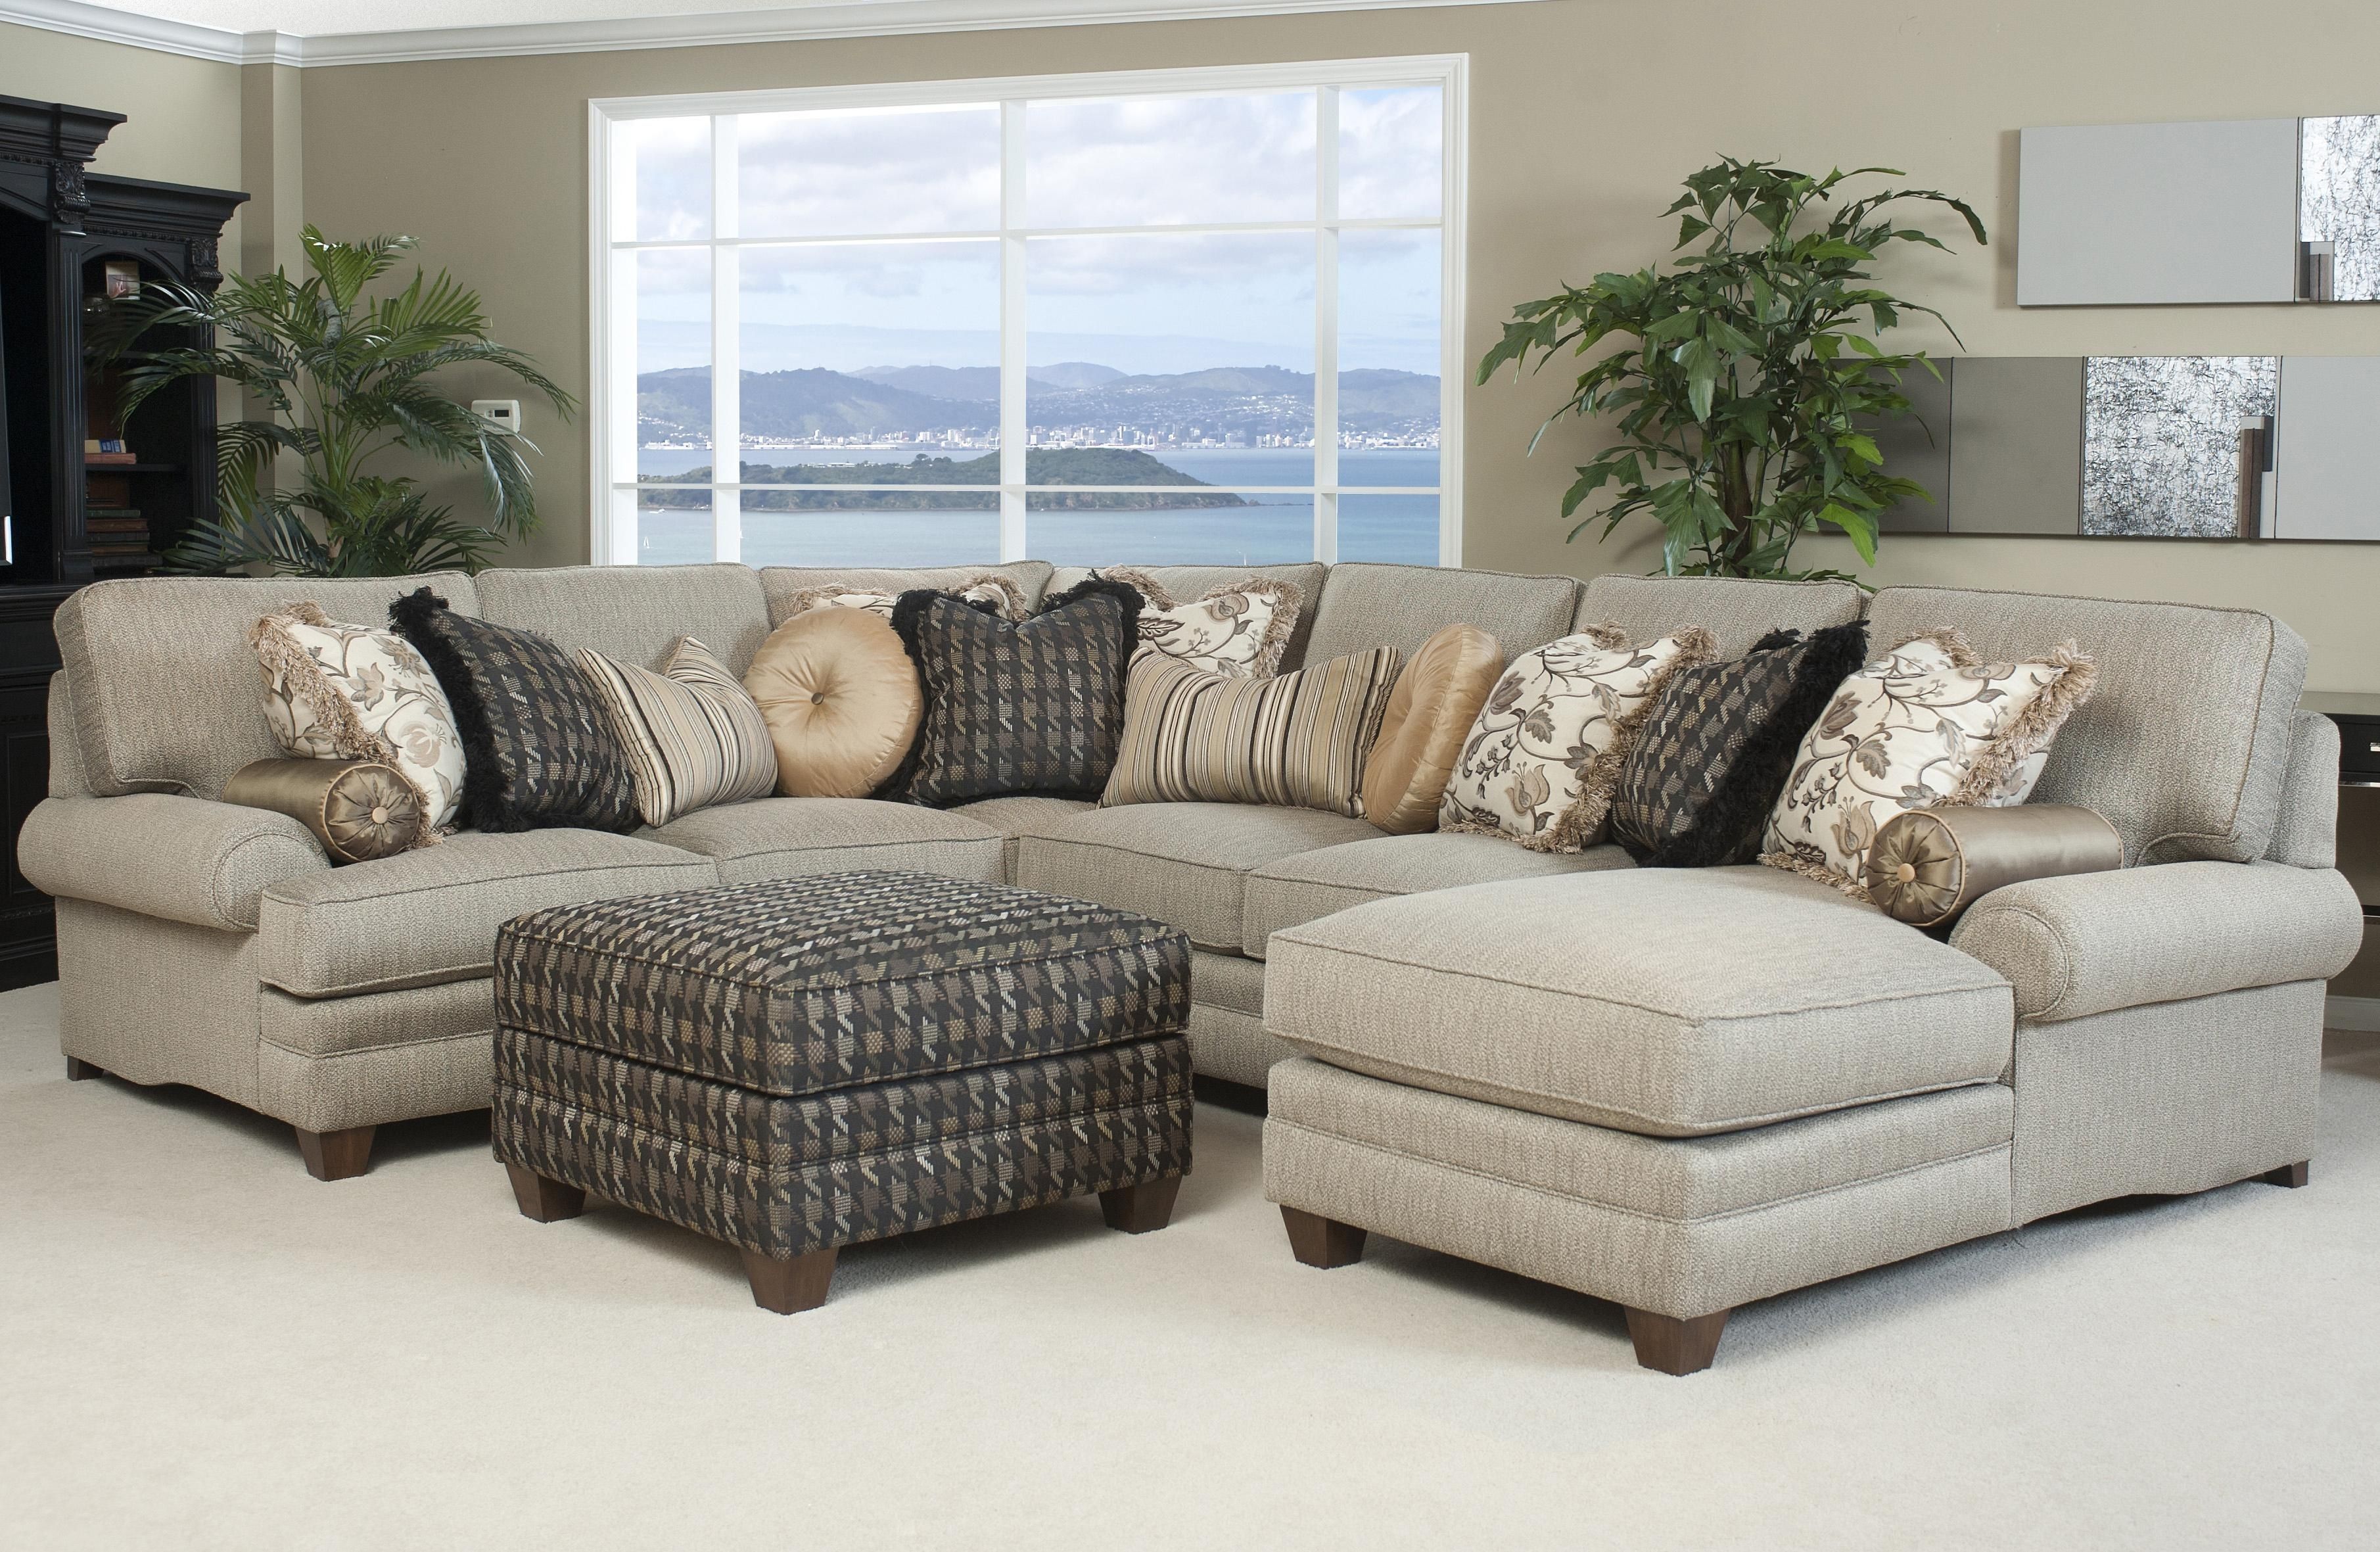 Leather Sectional Sofa Tulsa • Sectional Sofa For Tulsa Sectional Sofas (View 5 of 10)